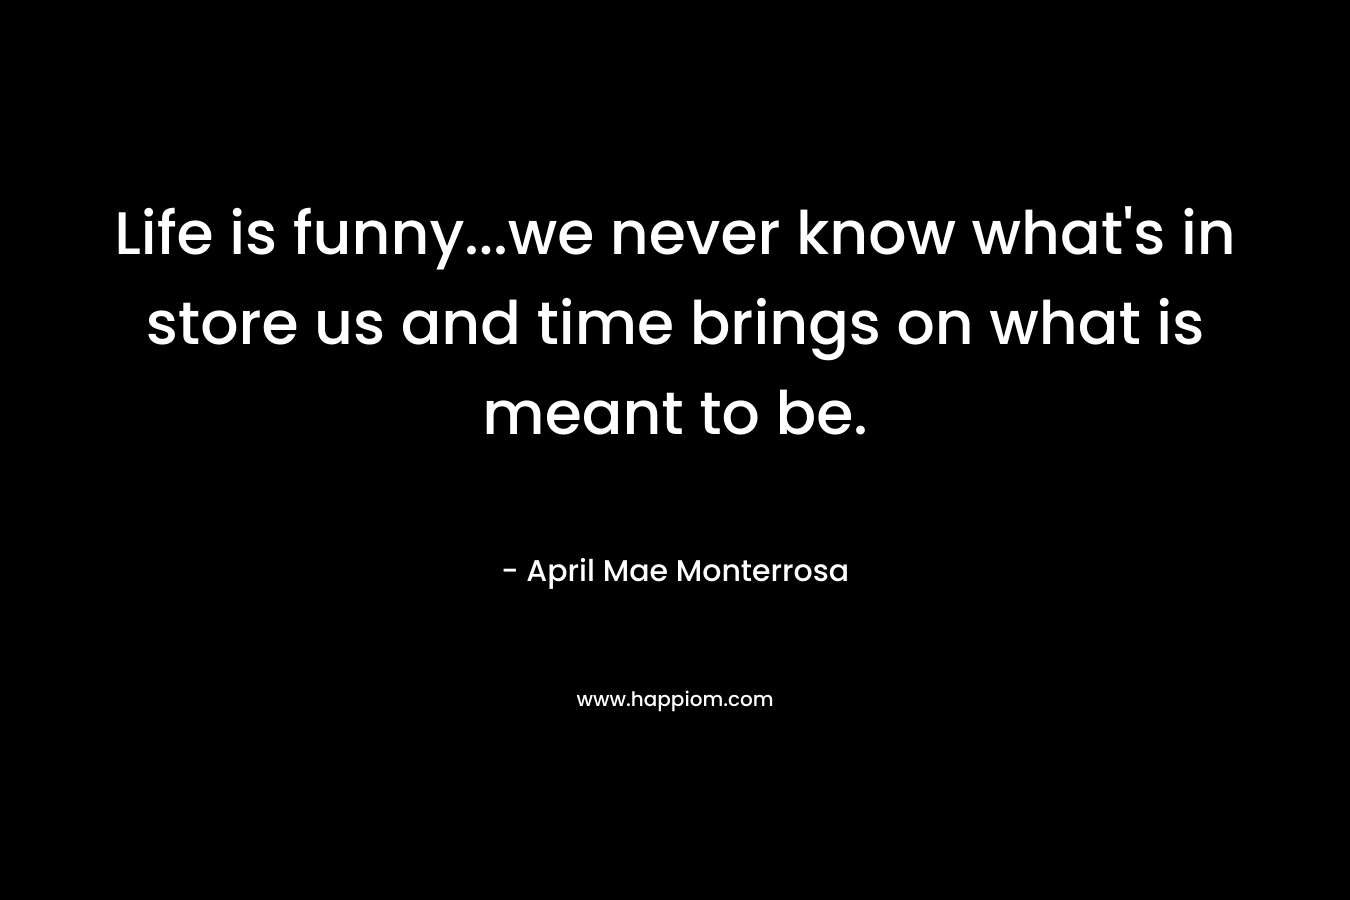 Life is funny...we never know what's in store us and time brings on what is meant to be.